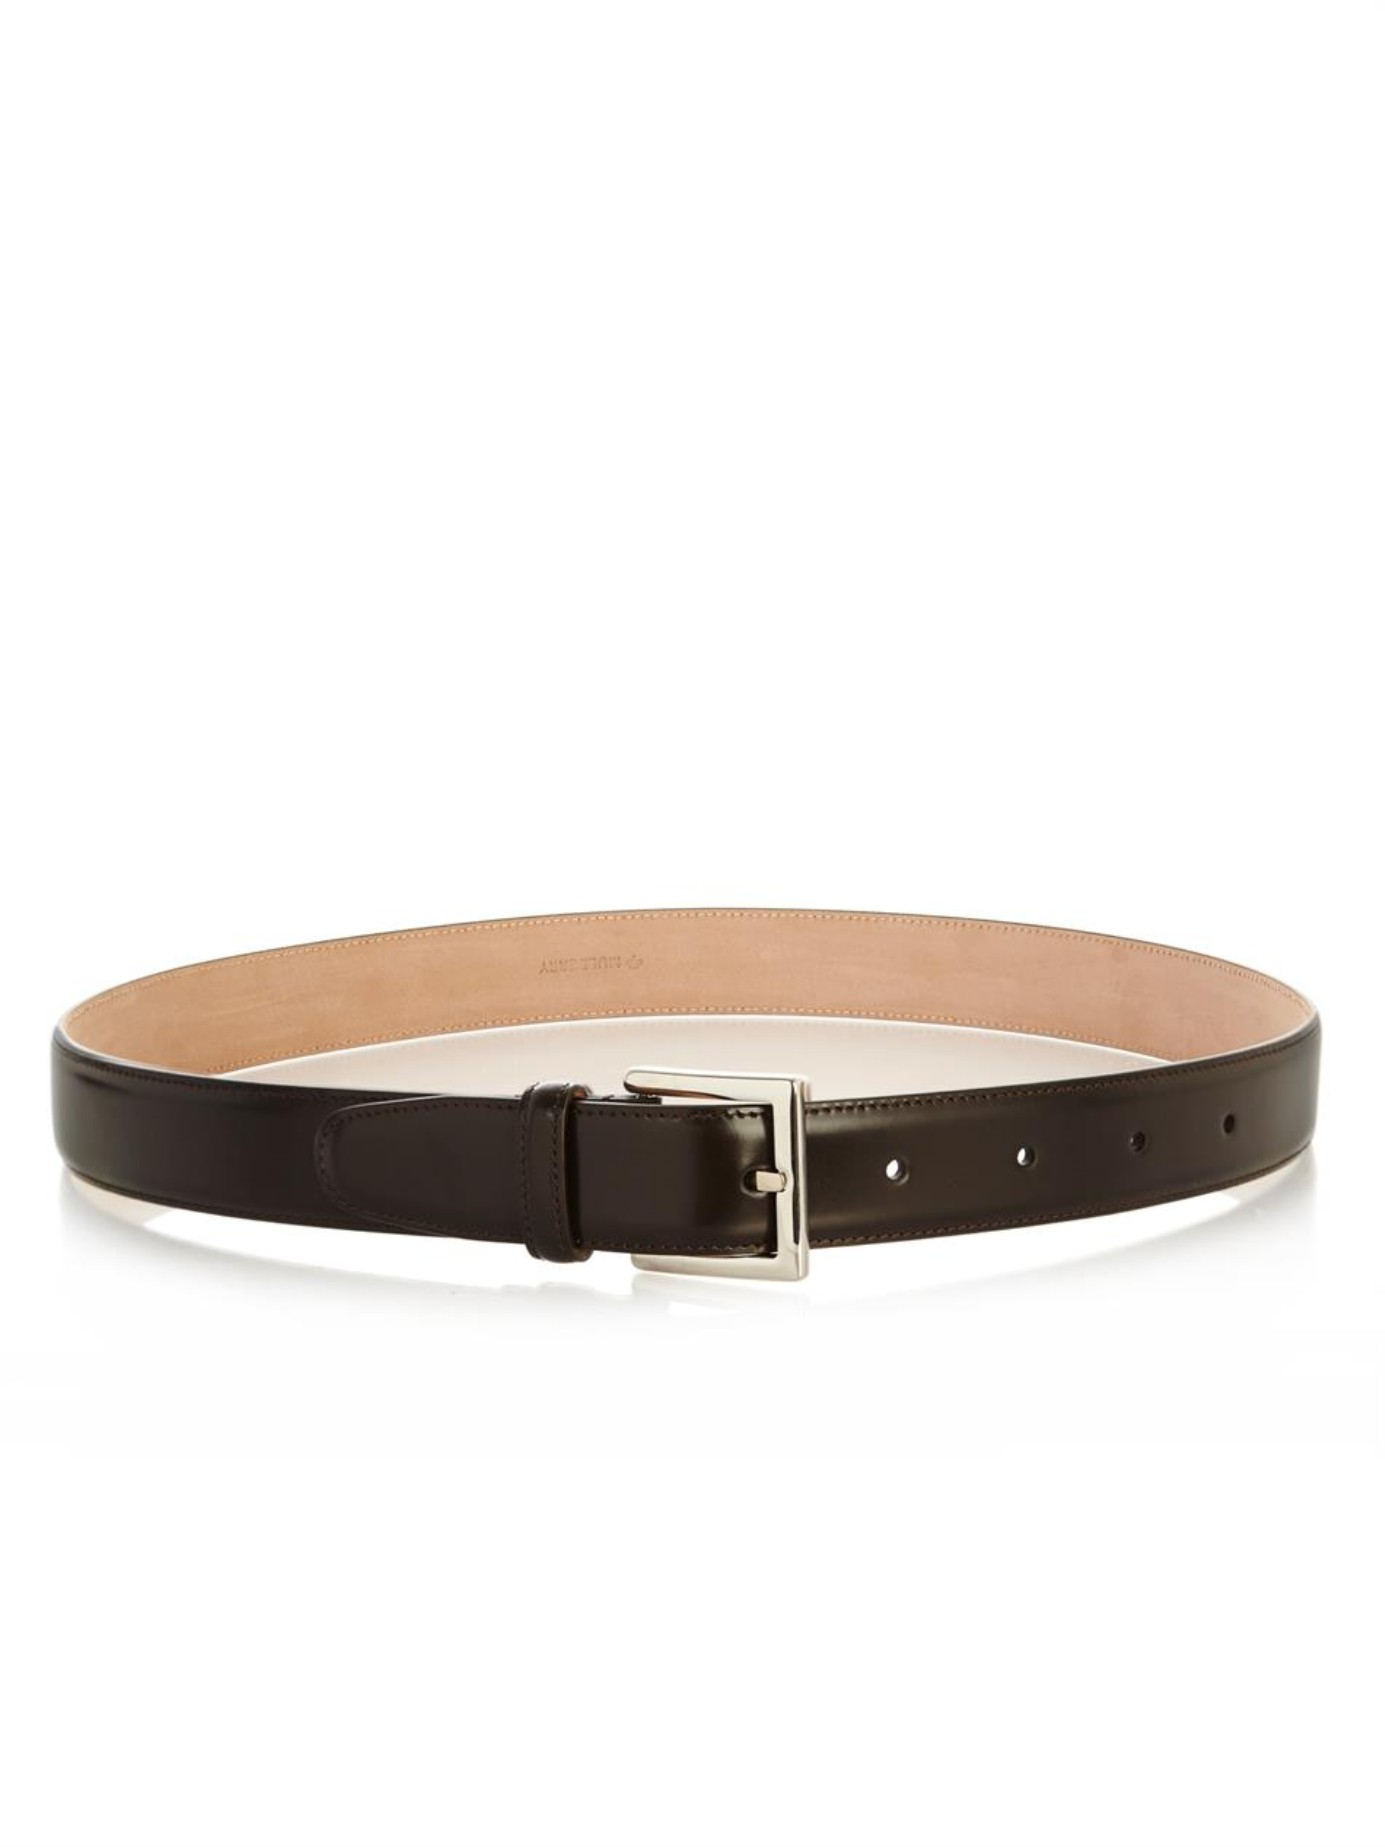 Mulberry Classic Leather Belt in Brown for Men - Lyst